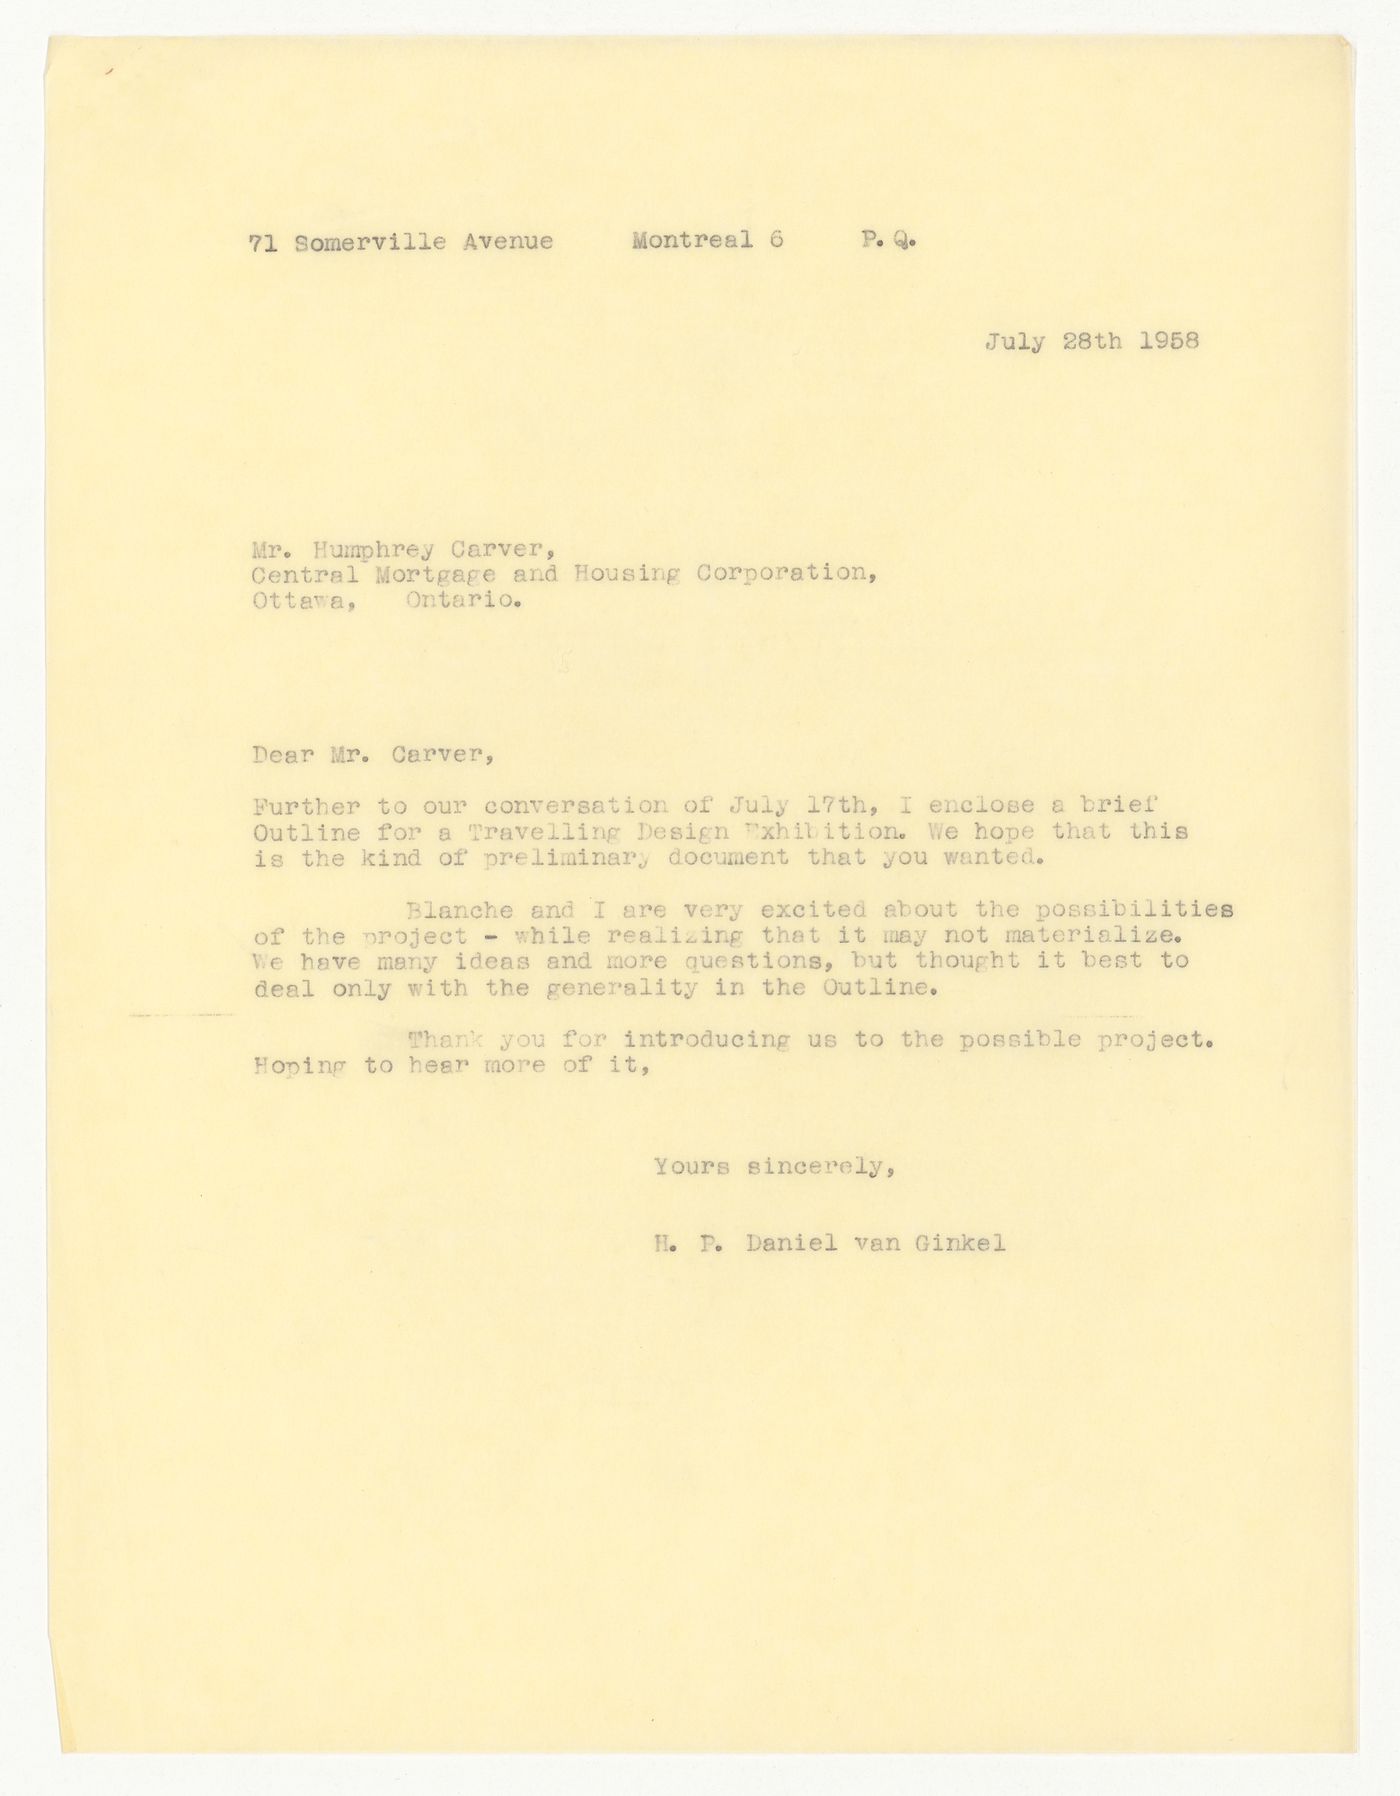 Letter from H. P. Daniel van Ginkel to Humphrey Carver with attached outline proposition for a travelling design exhibition for CMHC Exhibition